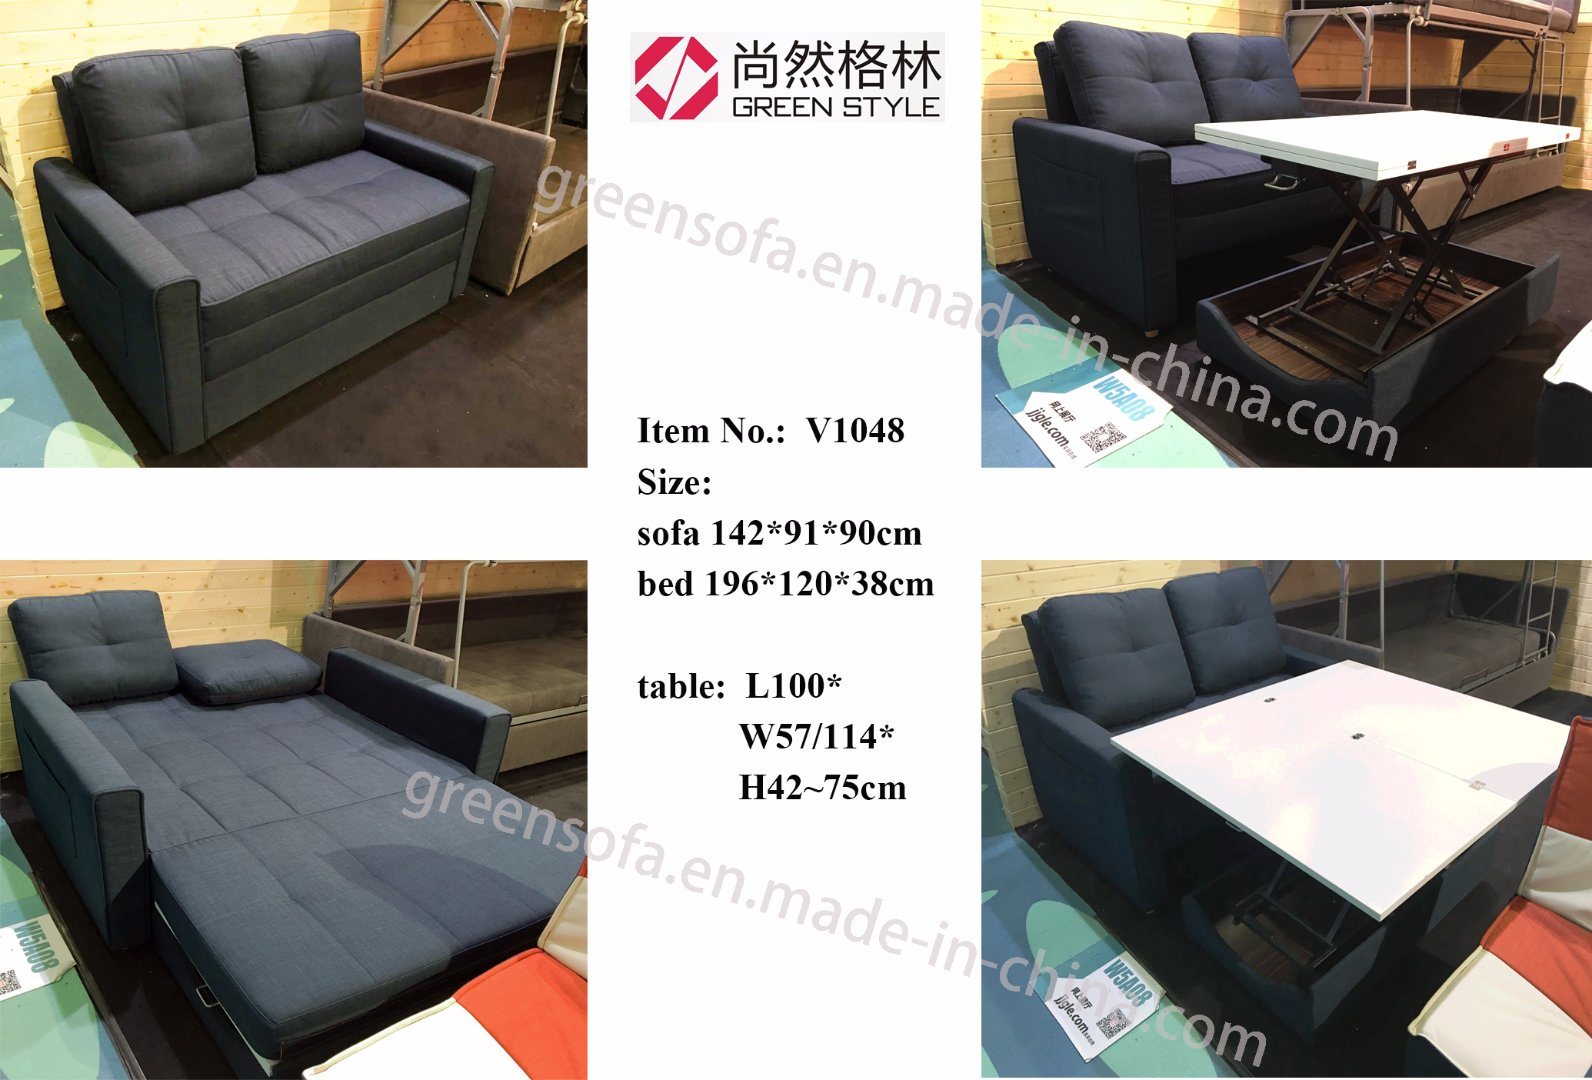 Folded Safebed with Hided Big Table